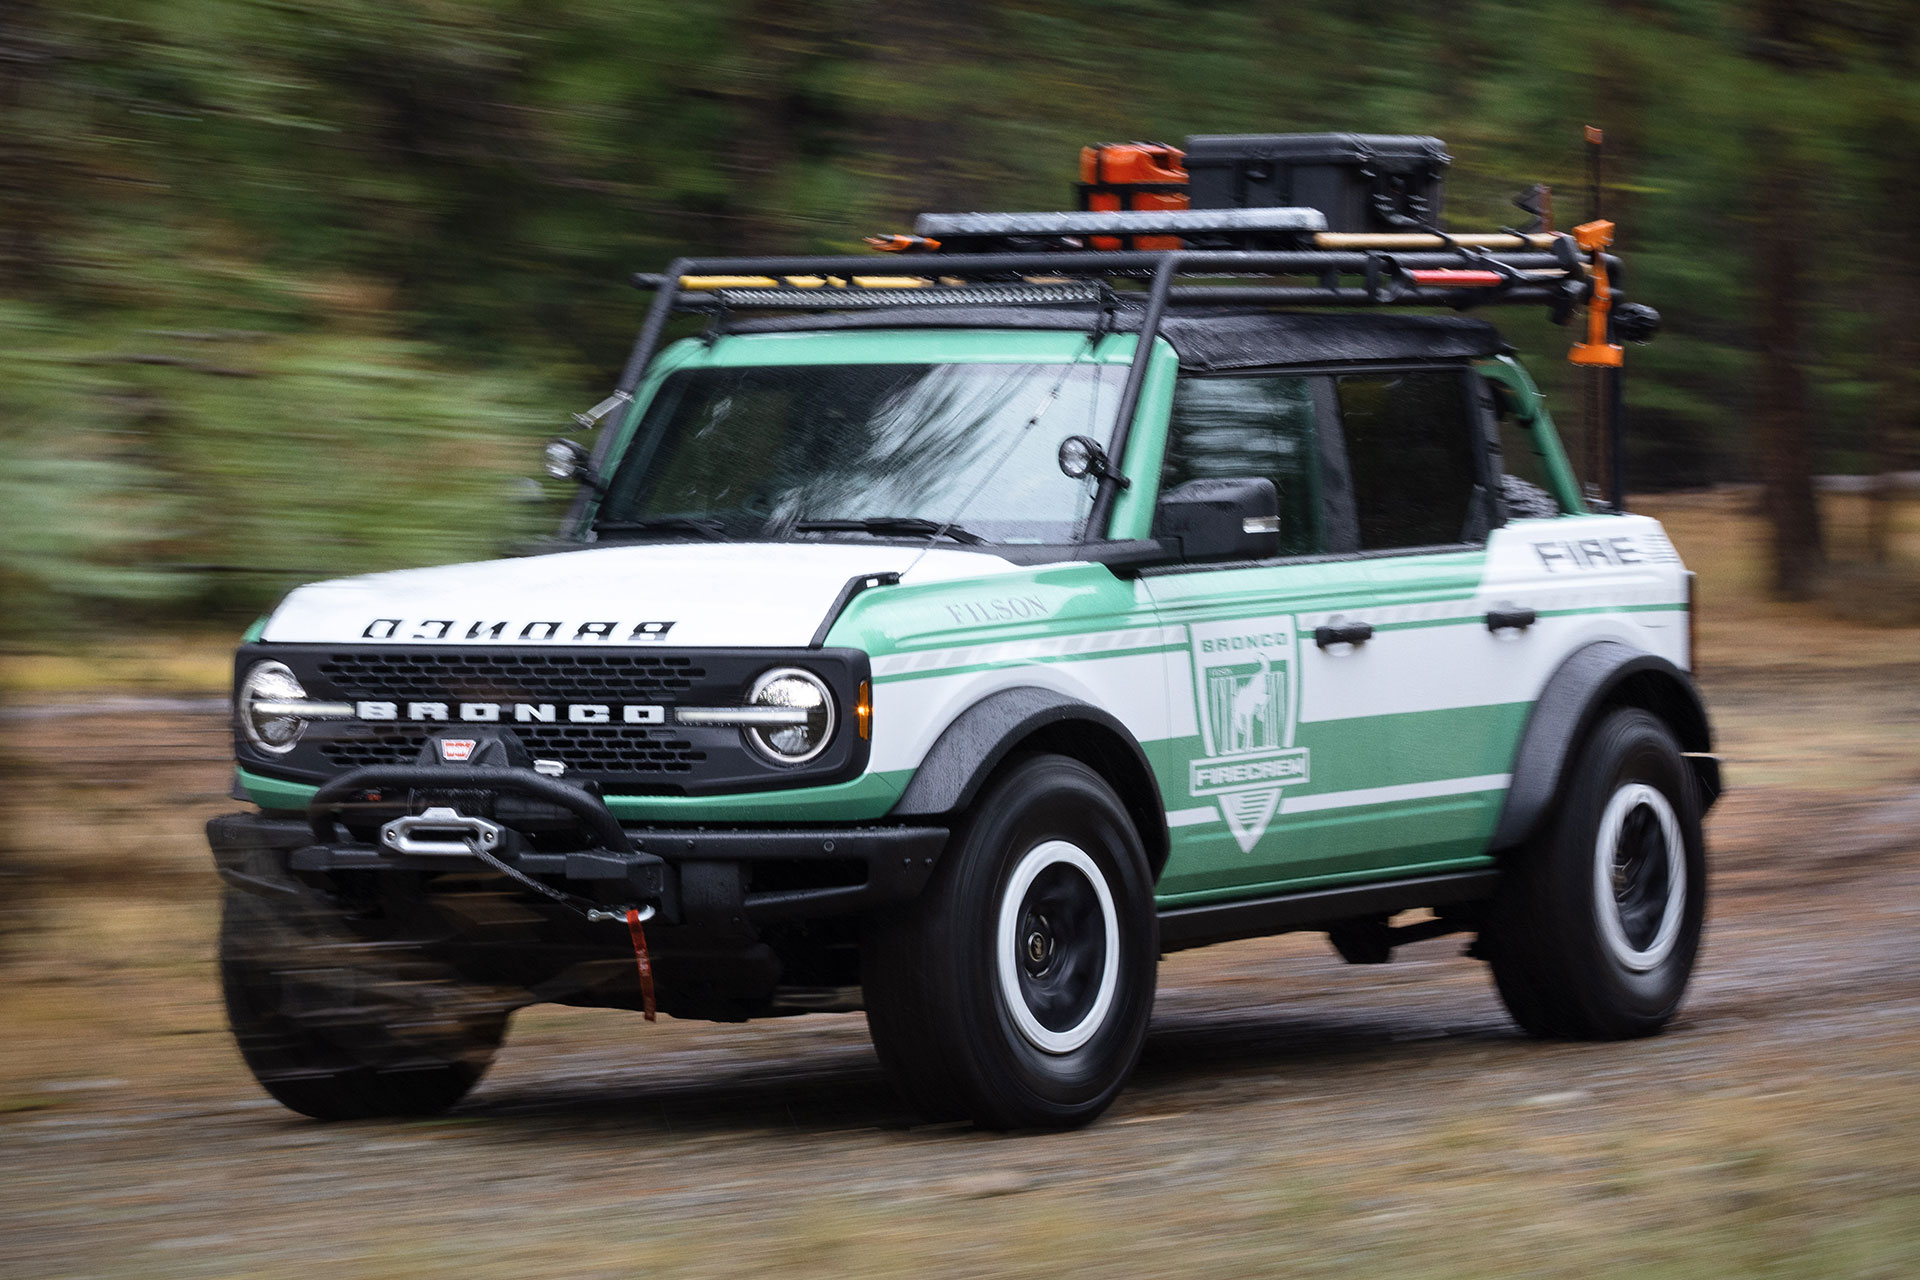 2021 Ford Bronco x Filson Wildland Fire Rig | Uncrate 2021 Ford Bronco Soft Top Roof Rack